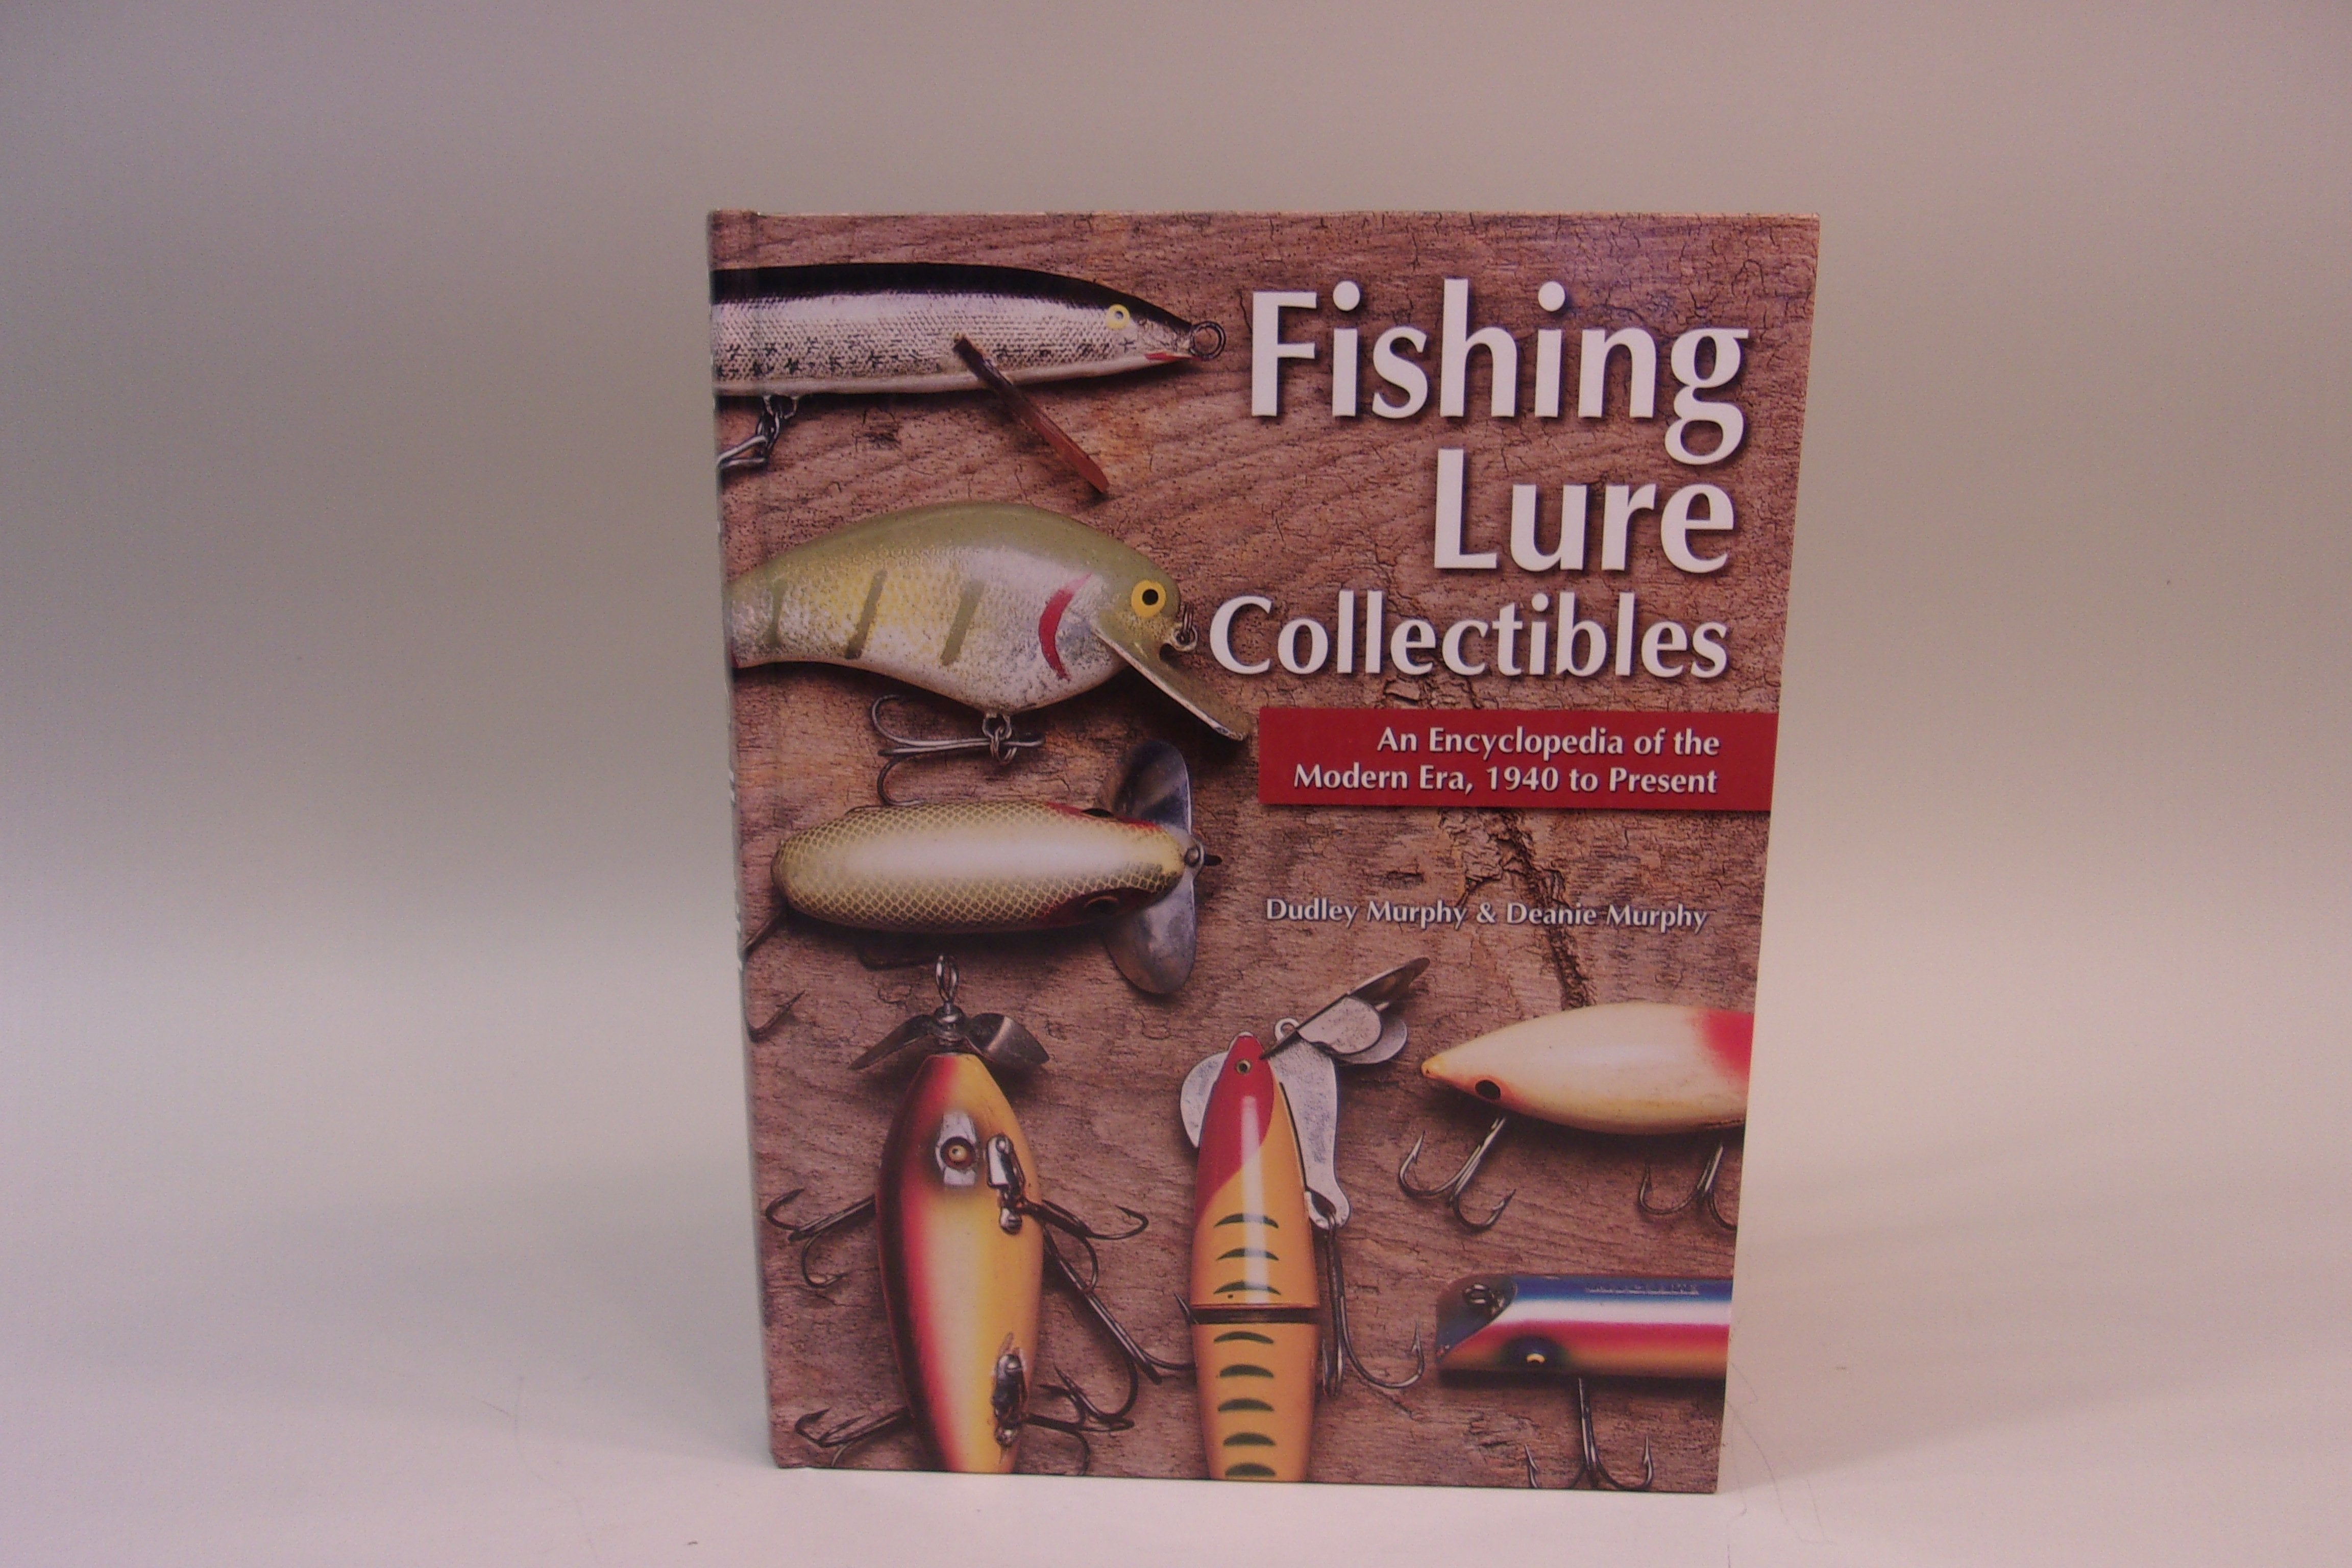 The Encyclopedia of Old Fishing Lures Made in North America Volume 10